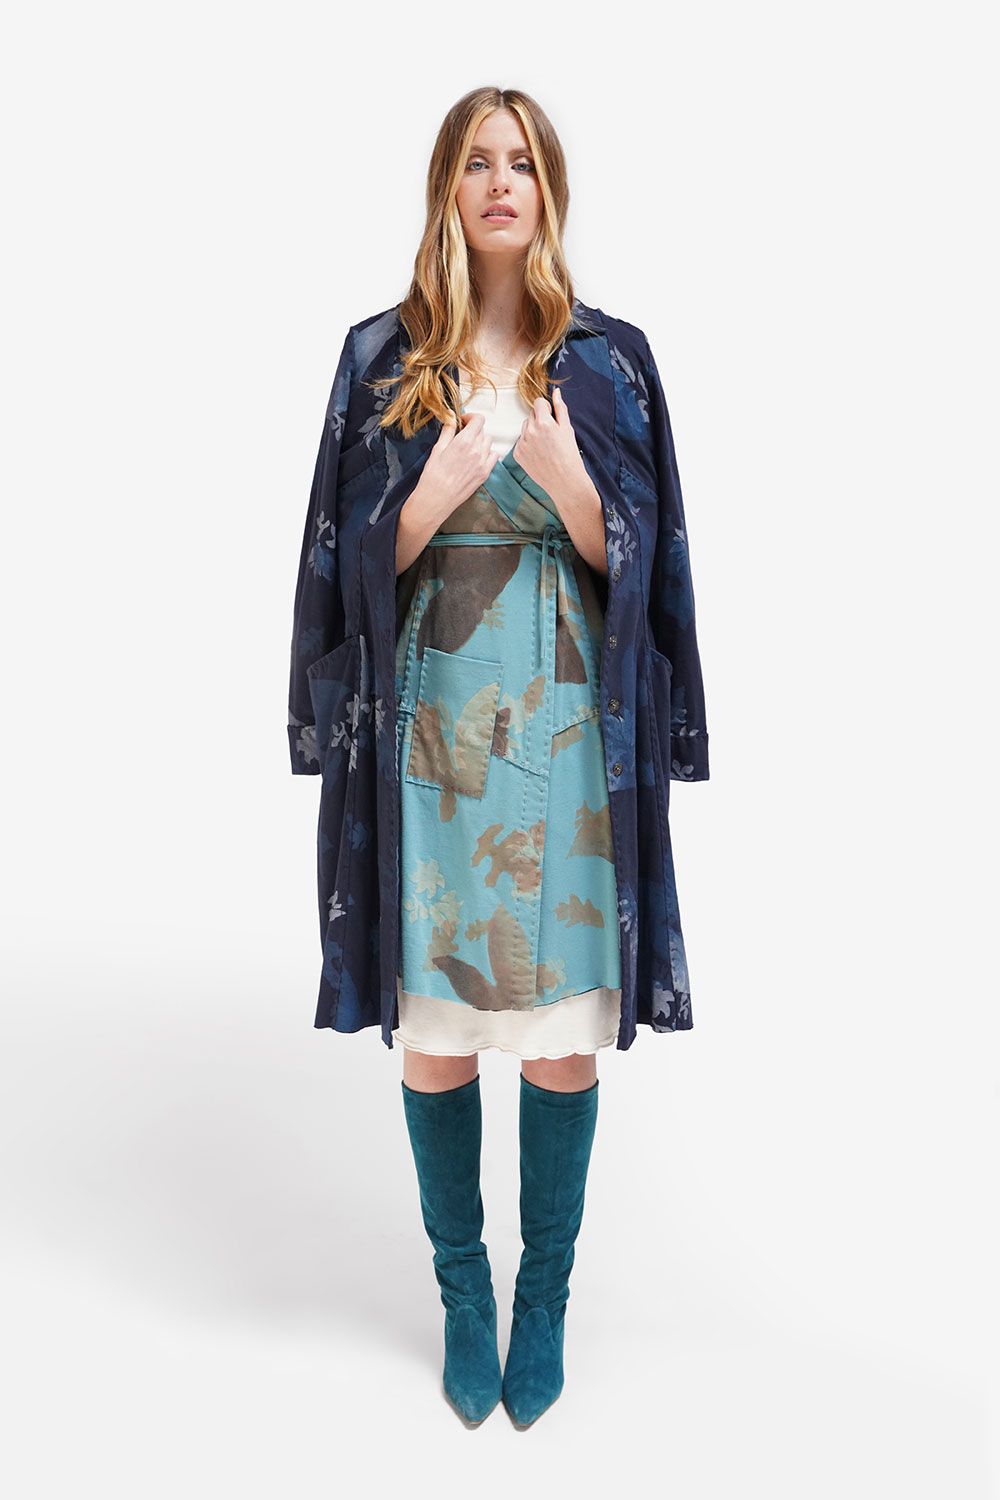 Alabama Chanin The Marin Coat and Fisher Dress in Hand-Painted Wind Design Styled with the Organic Cotton Rib Slip Dress from the Alabama Chanin New Wind + Wave Collection